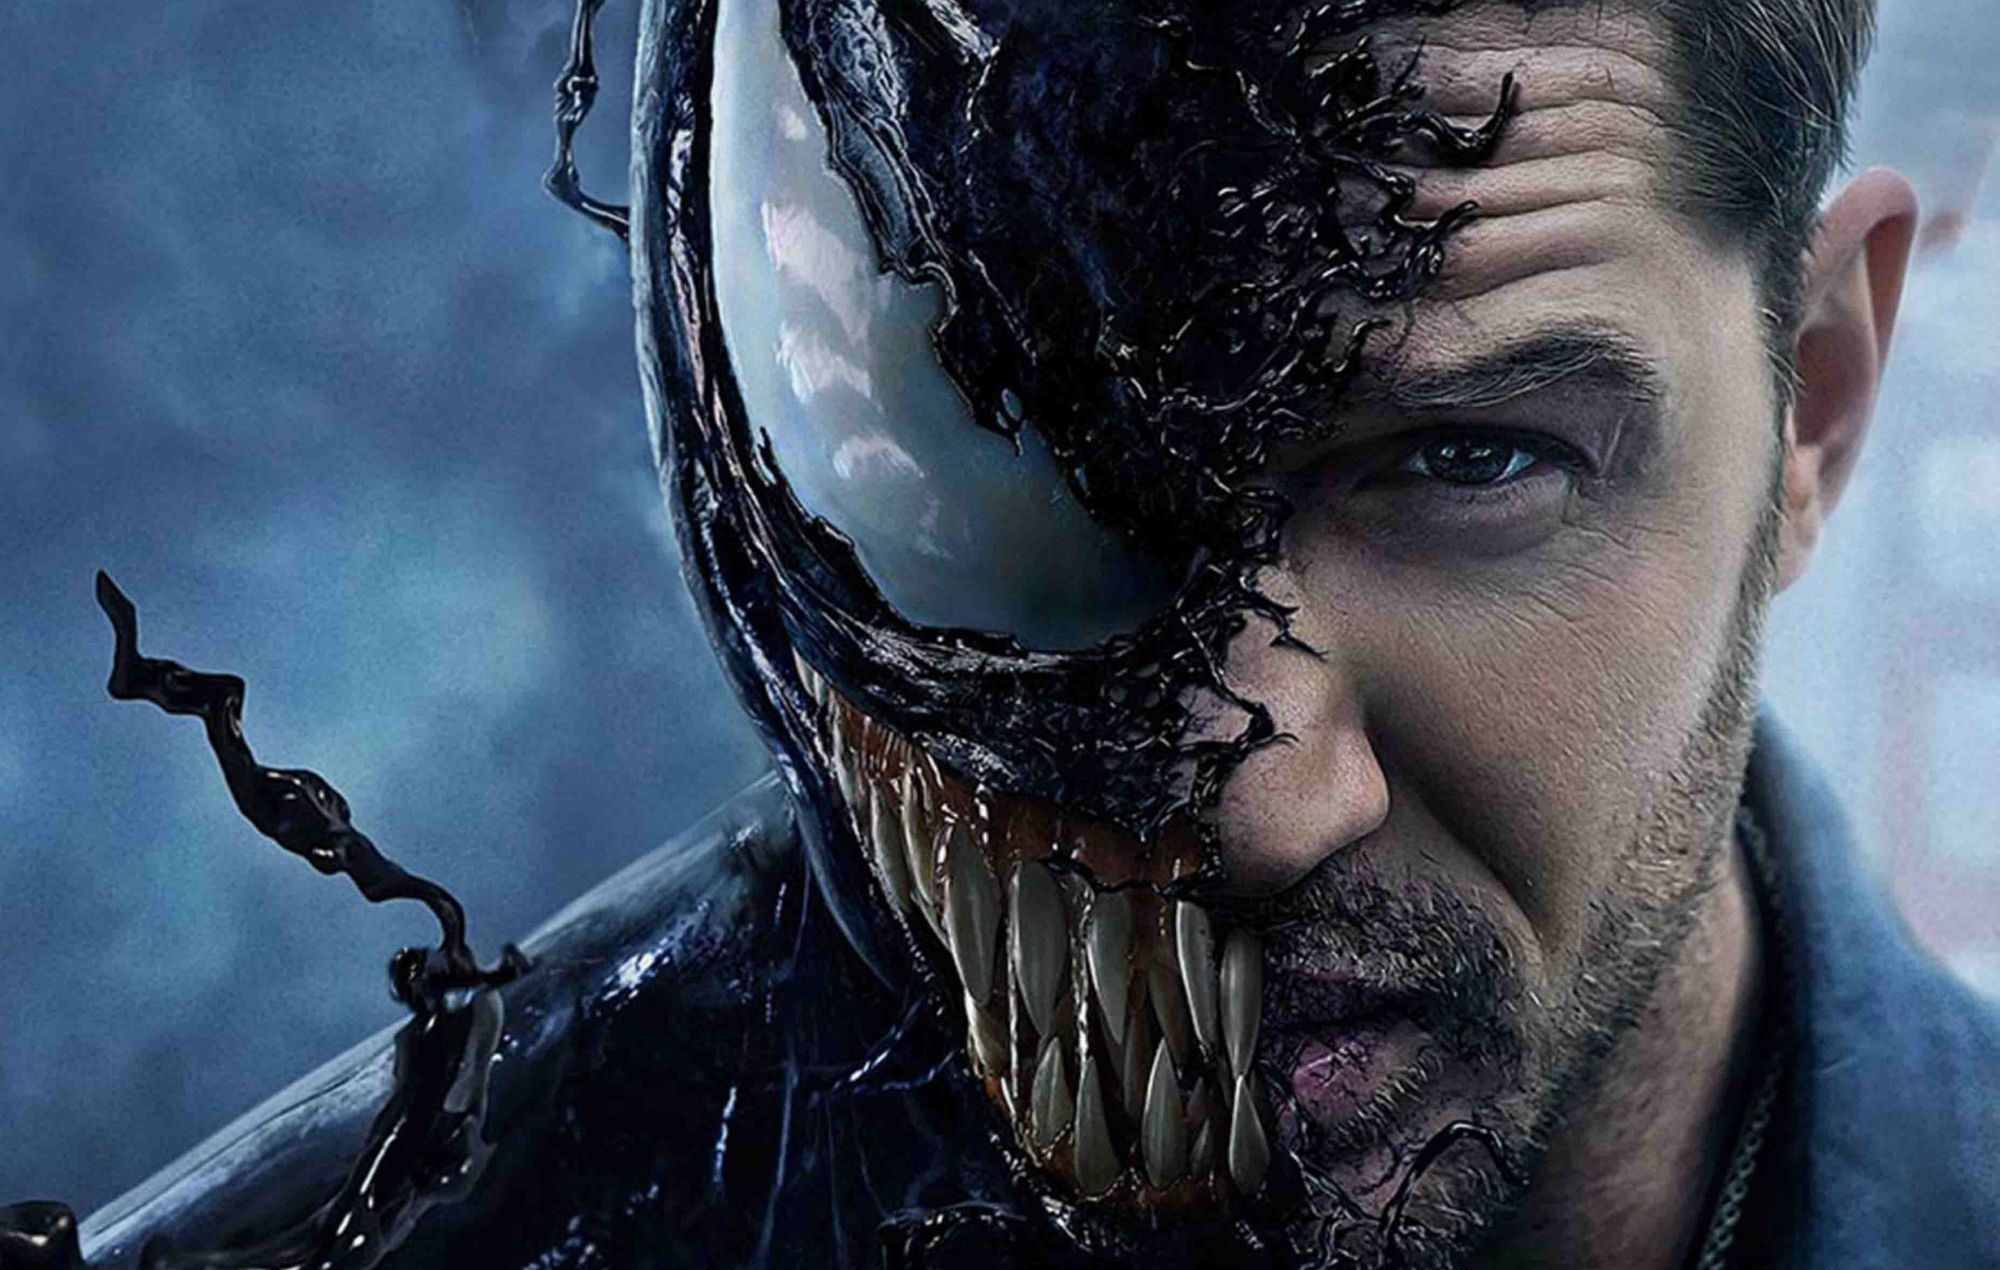 The release of 'Venom 2' has been delayed to September